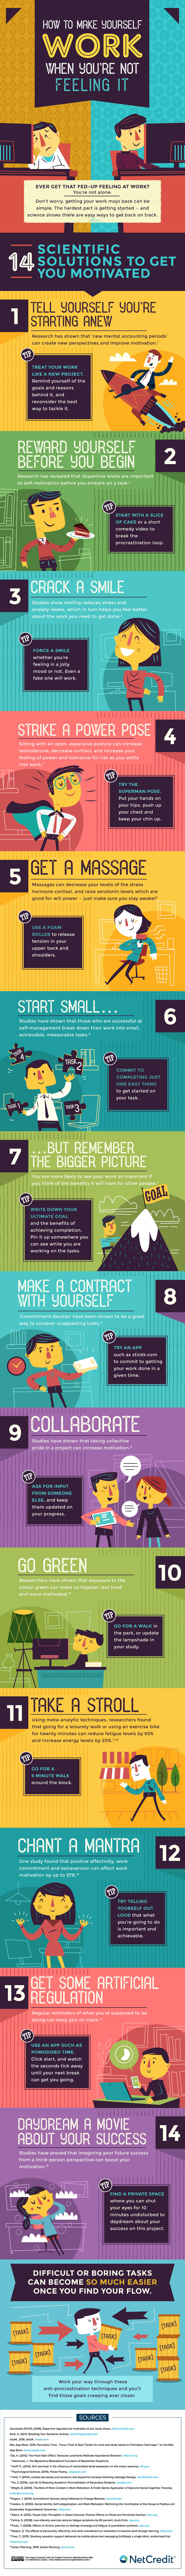 infographic-how-to-make-yourself-work-when-youre-not-feeling-it